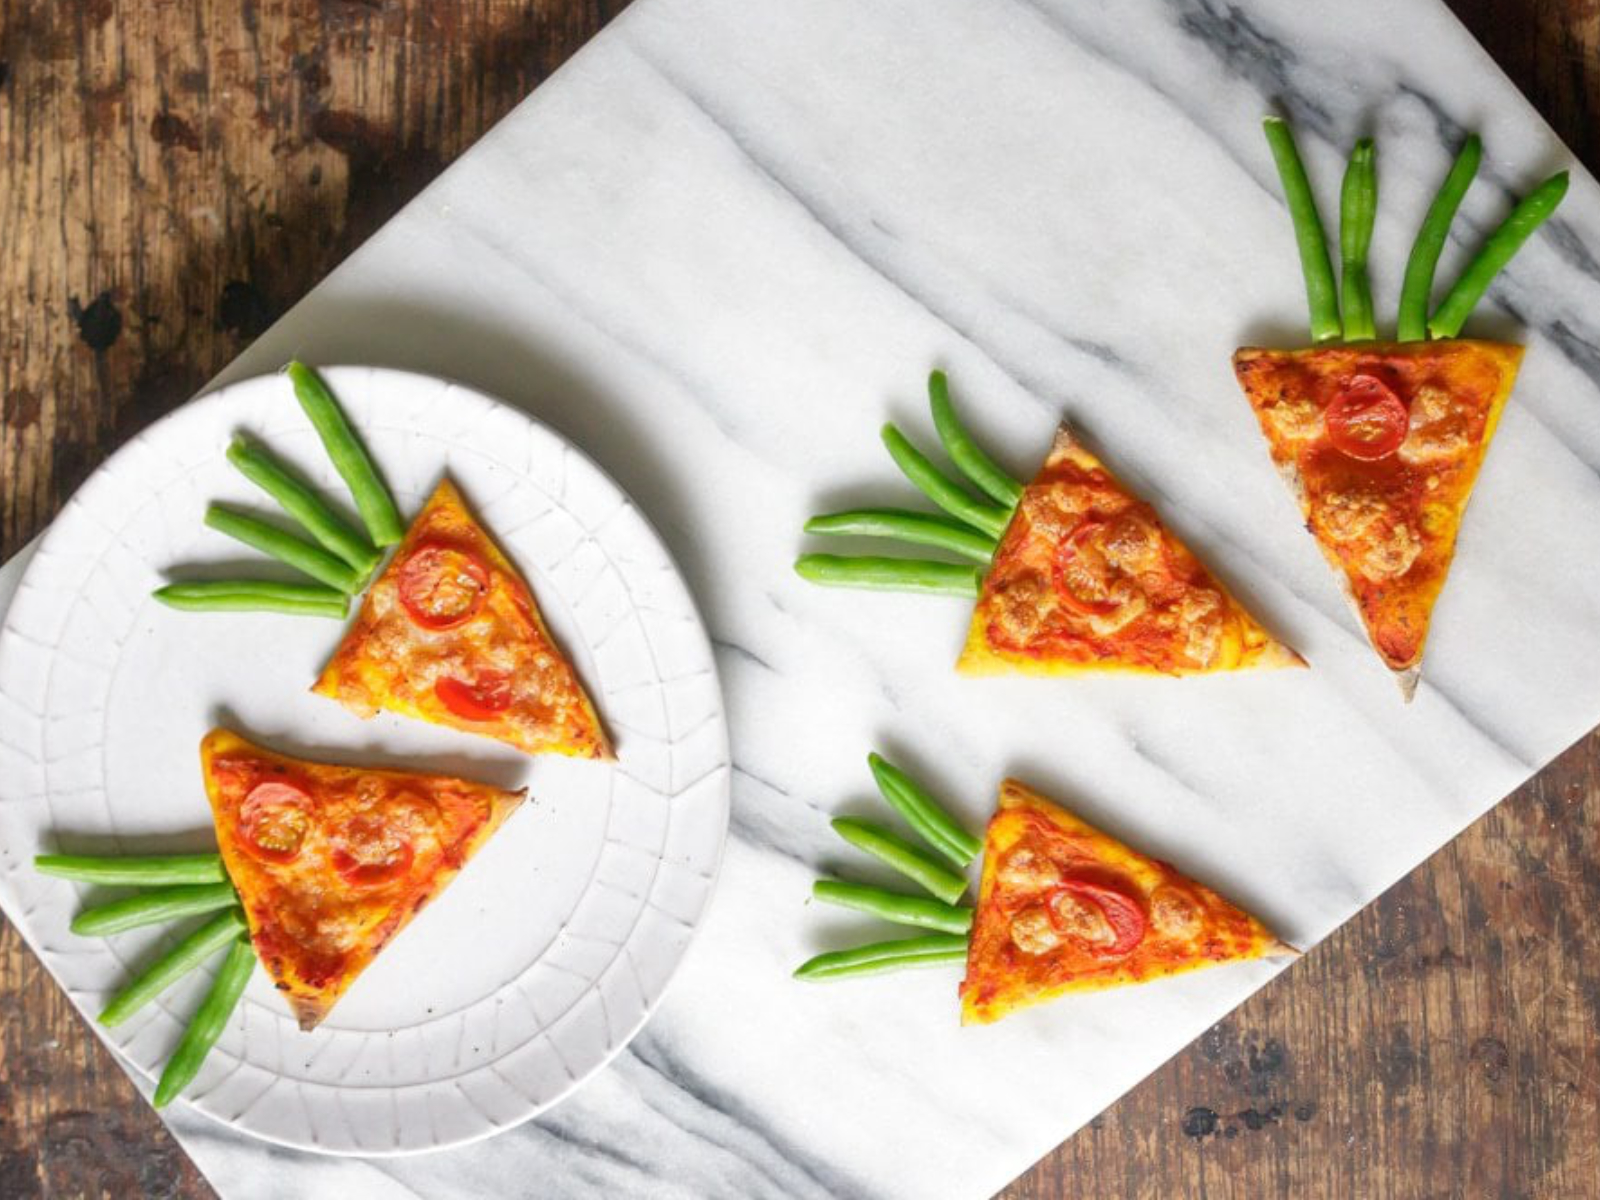 Carrot Pizza with Carrot Sauce